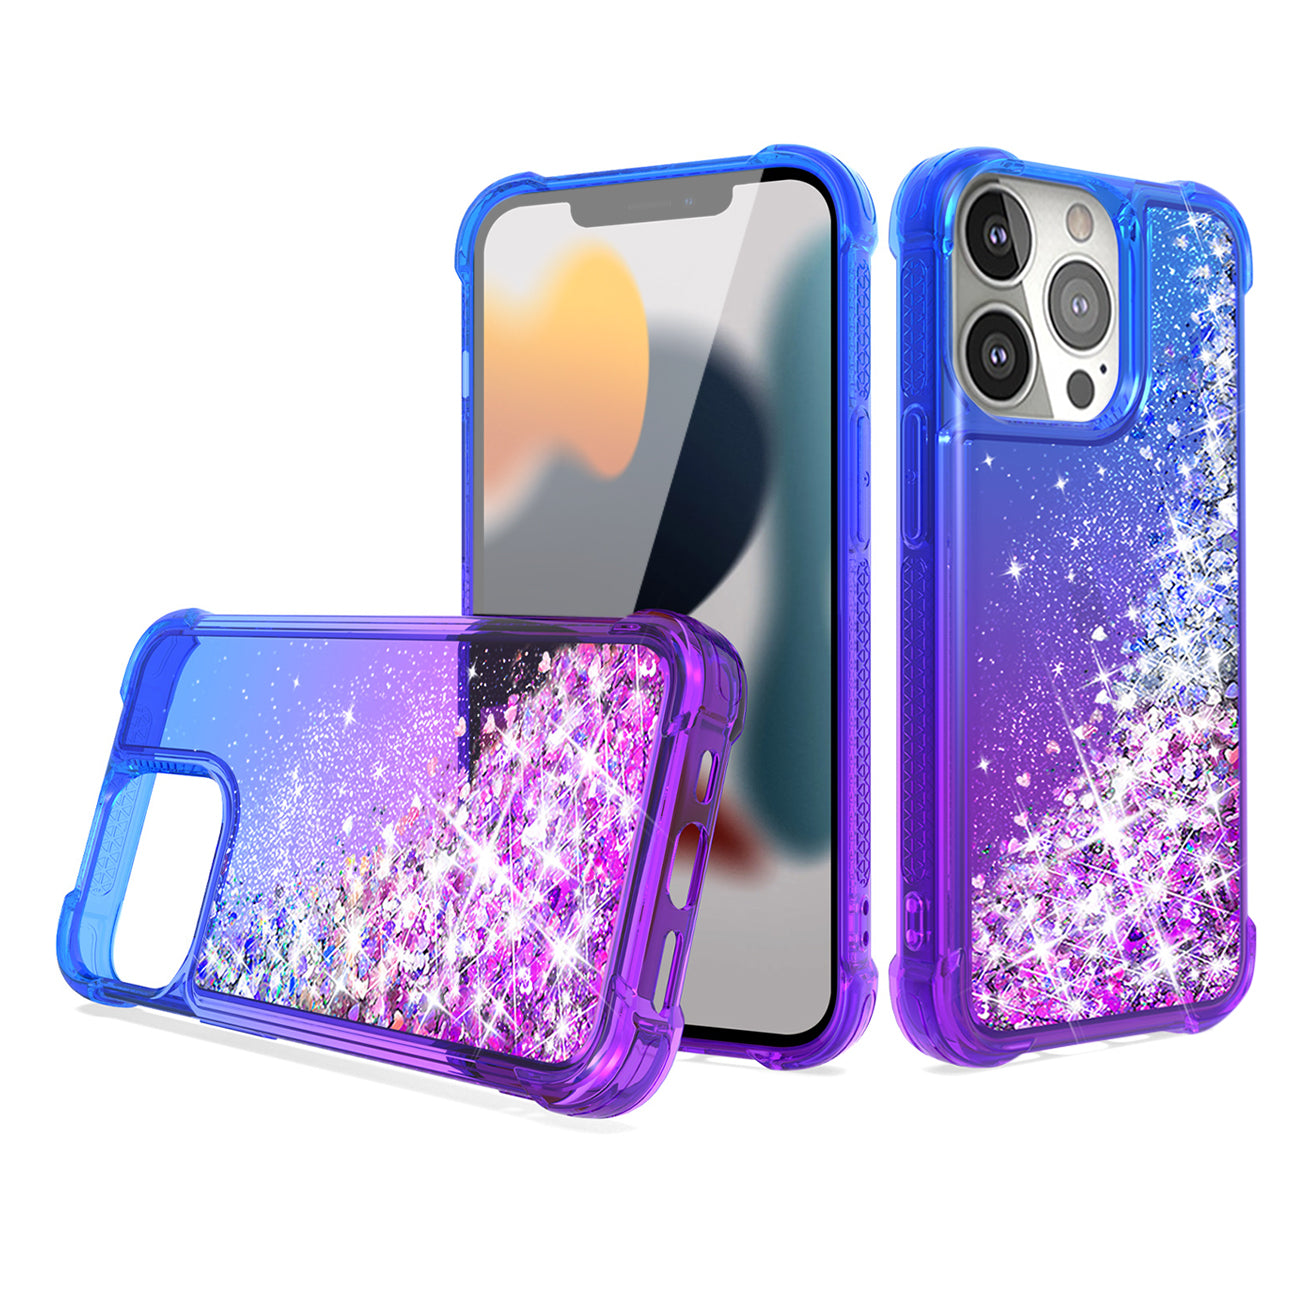 Shiny Flowing Glitter Liquid Bumper Case For APPLE IPHONE 13 PRO In Blue